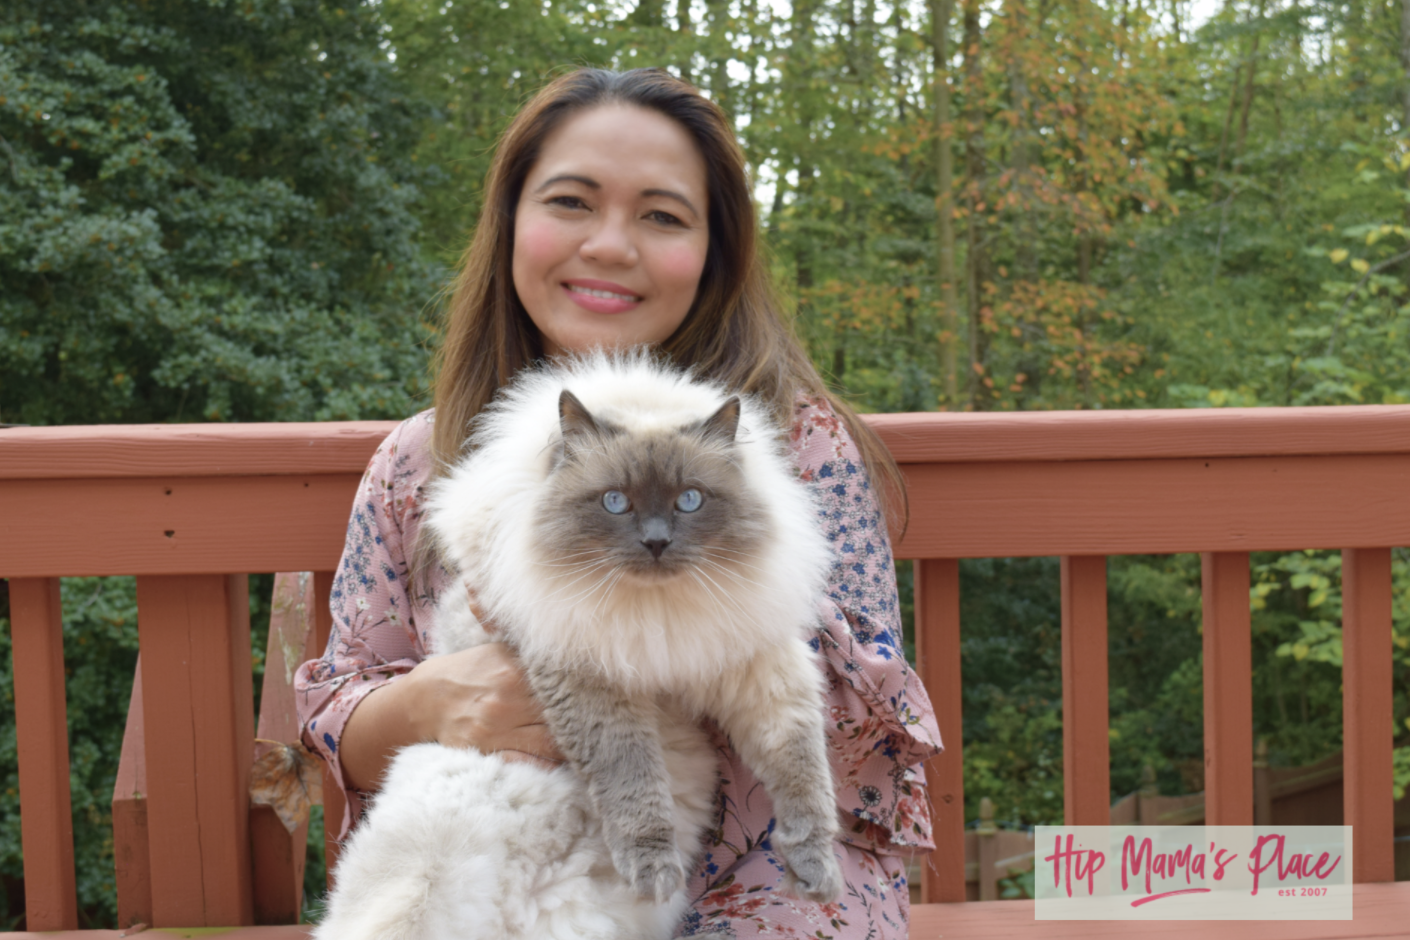 October 29 is National Cat Day and I'm happy to be partnering with Fresh Step® Litter for this post celebrating our love for our pet cat, Oscar!